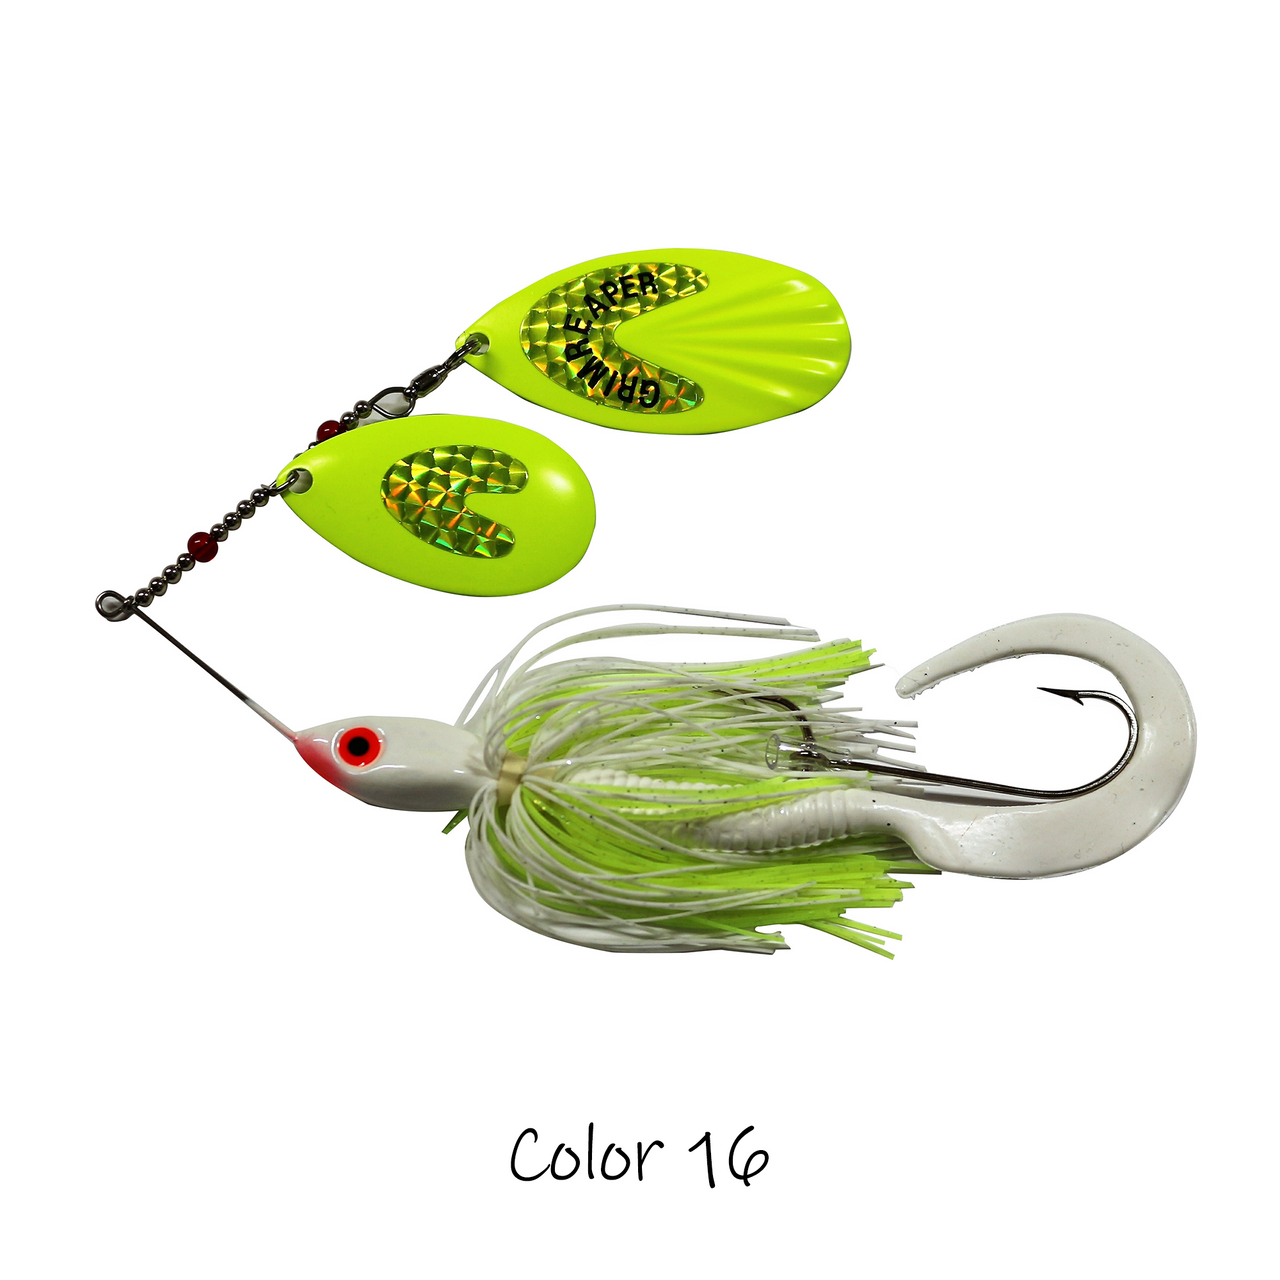 MadBite Spinnerbait kits are available in 4 pc Multi-Color kits or